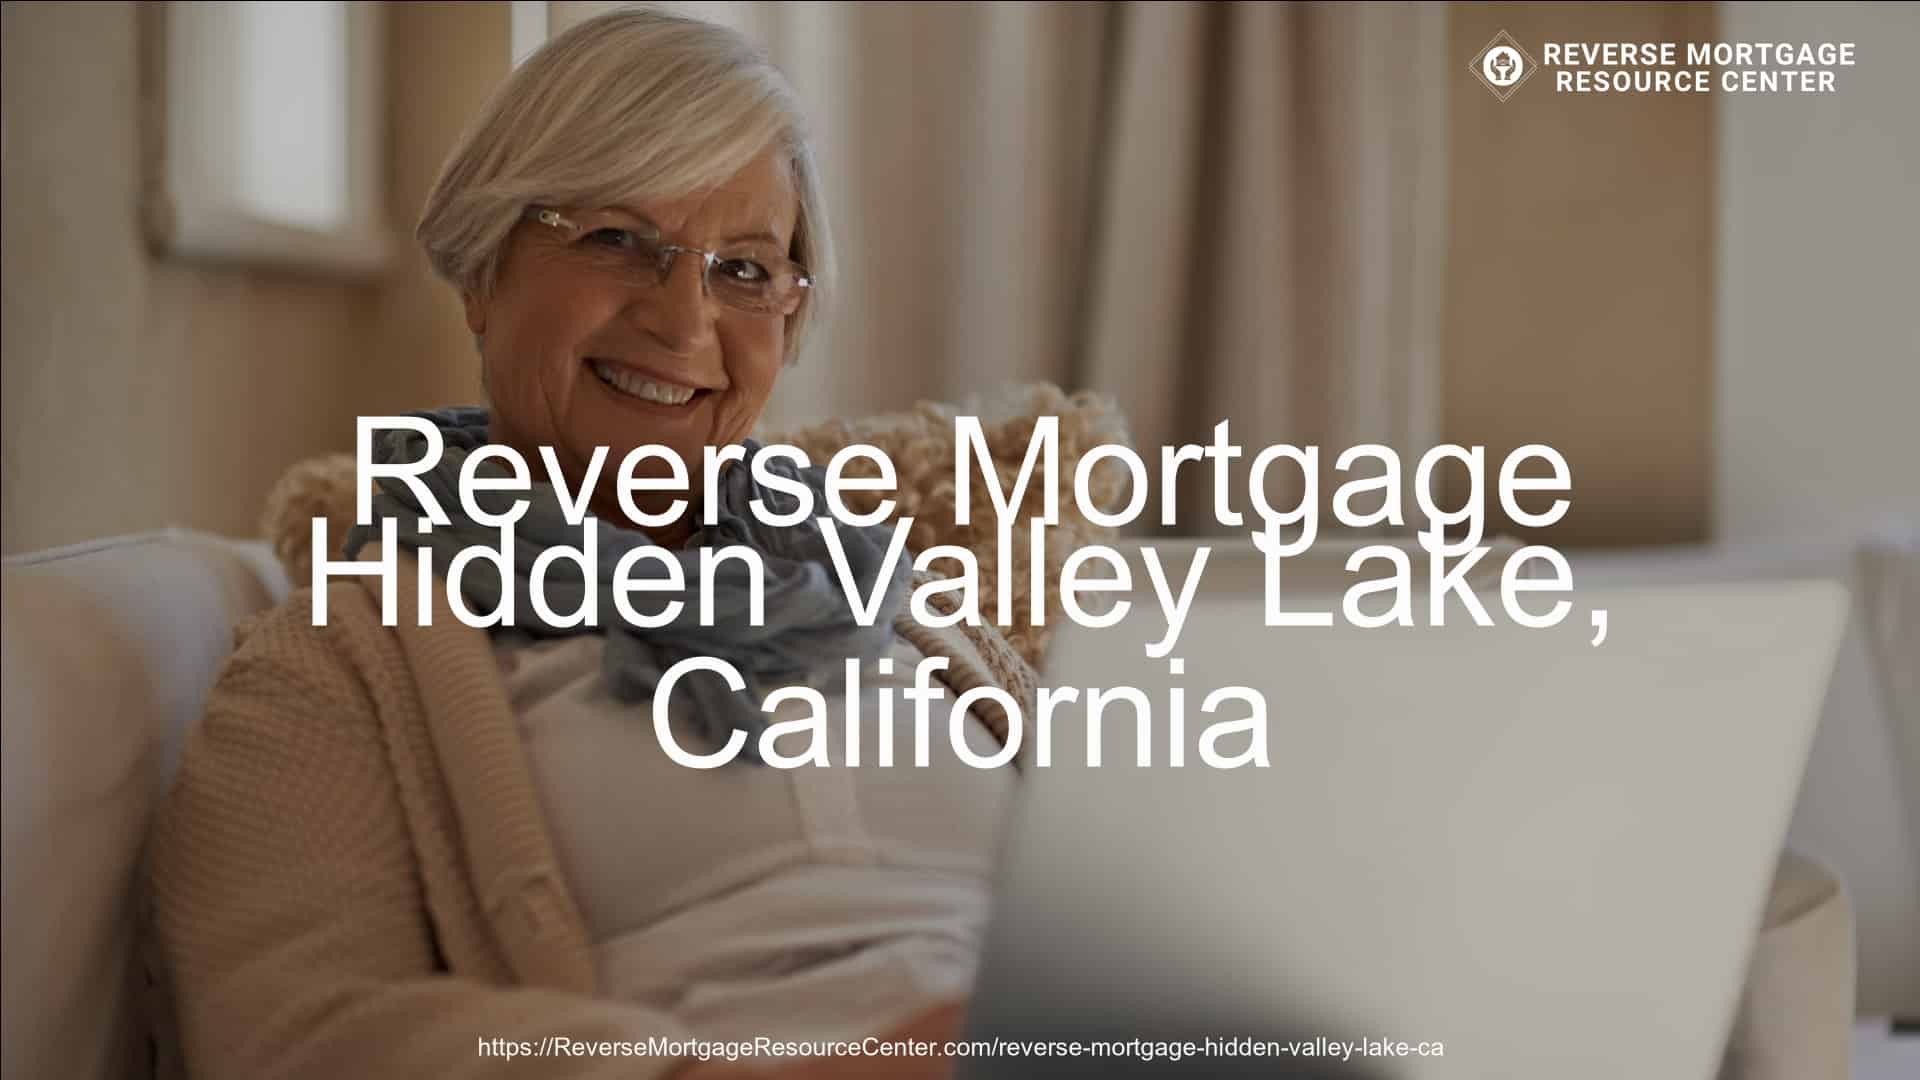 Reverse Mortgage in Hidden Valley Lake, CA